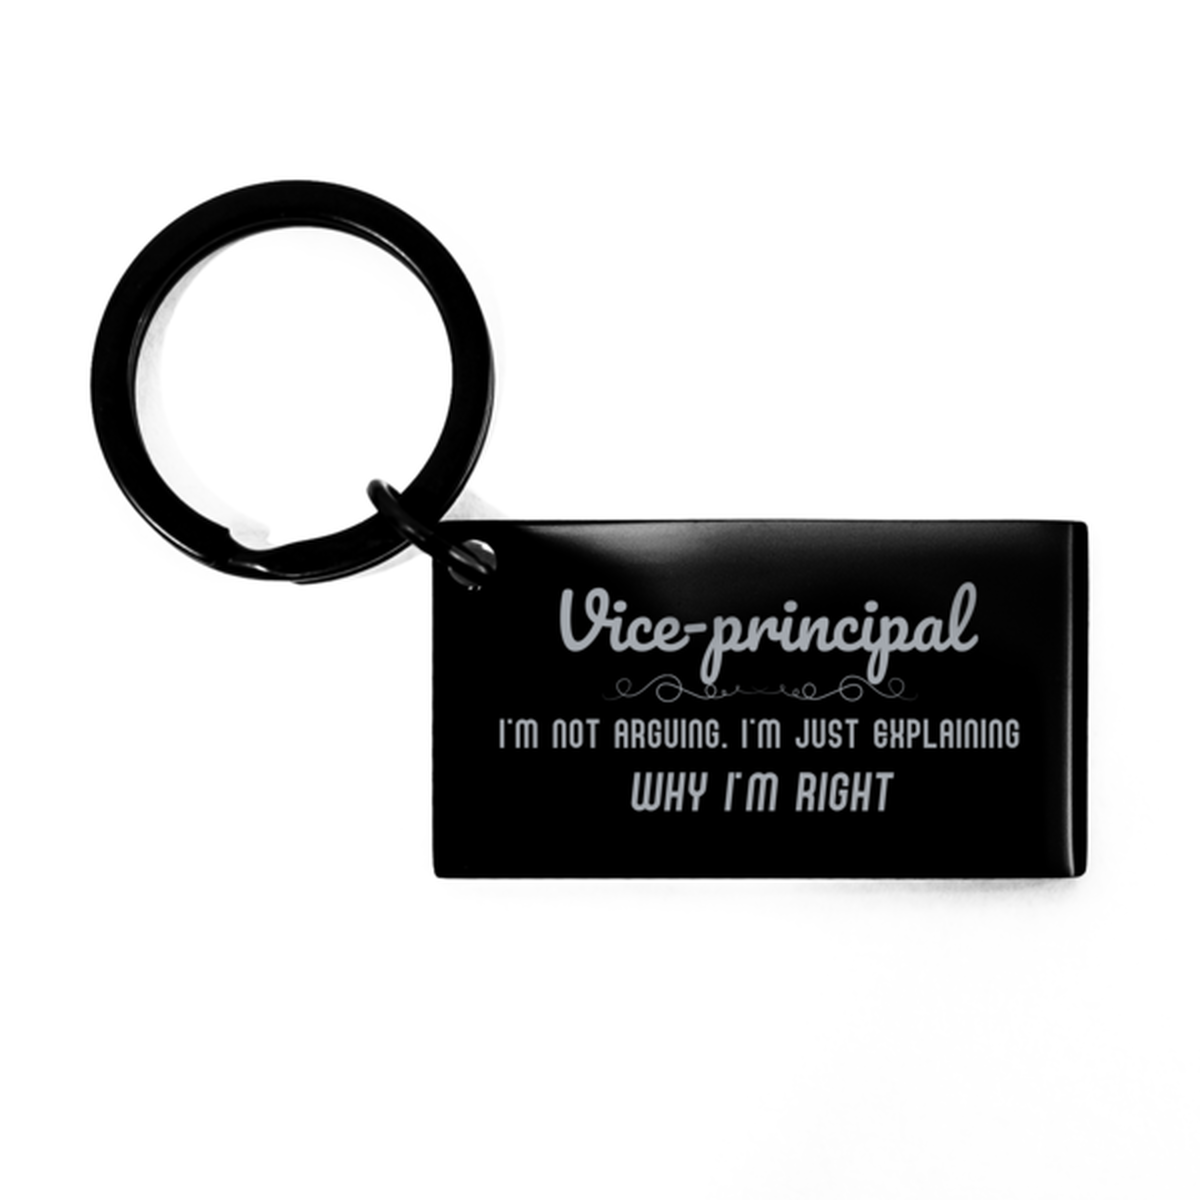 Vice-principal I'm not Arguing. I'm Just Explaining Why I'm RIGHT Keychain, Funny Saying Quote Vice-principal Gifts For Vice-principal Graduation Birthday Christmas Gifts for Men Women Coworker